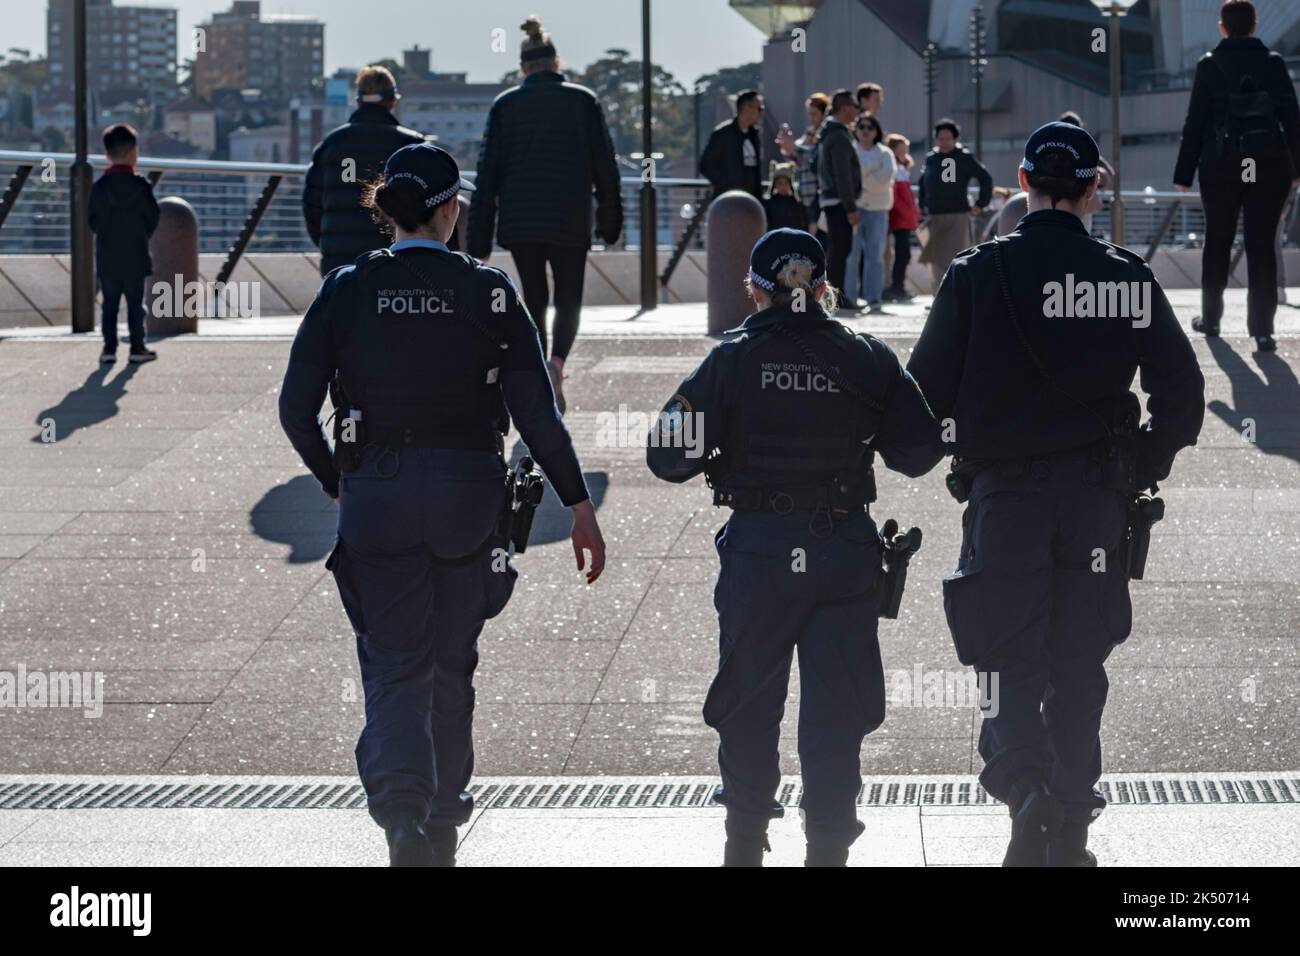 Three New South Wales Police officers on morning foot patrol, carrying side arms, walk around the forecourt of the Sydney Opera House in Australia Stock Photo